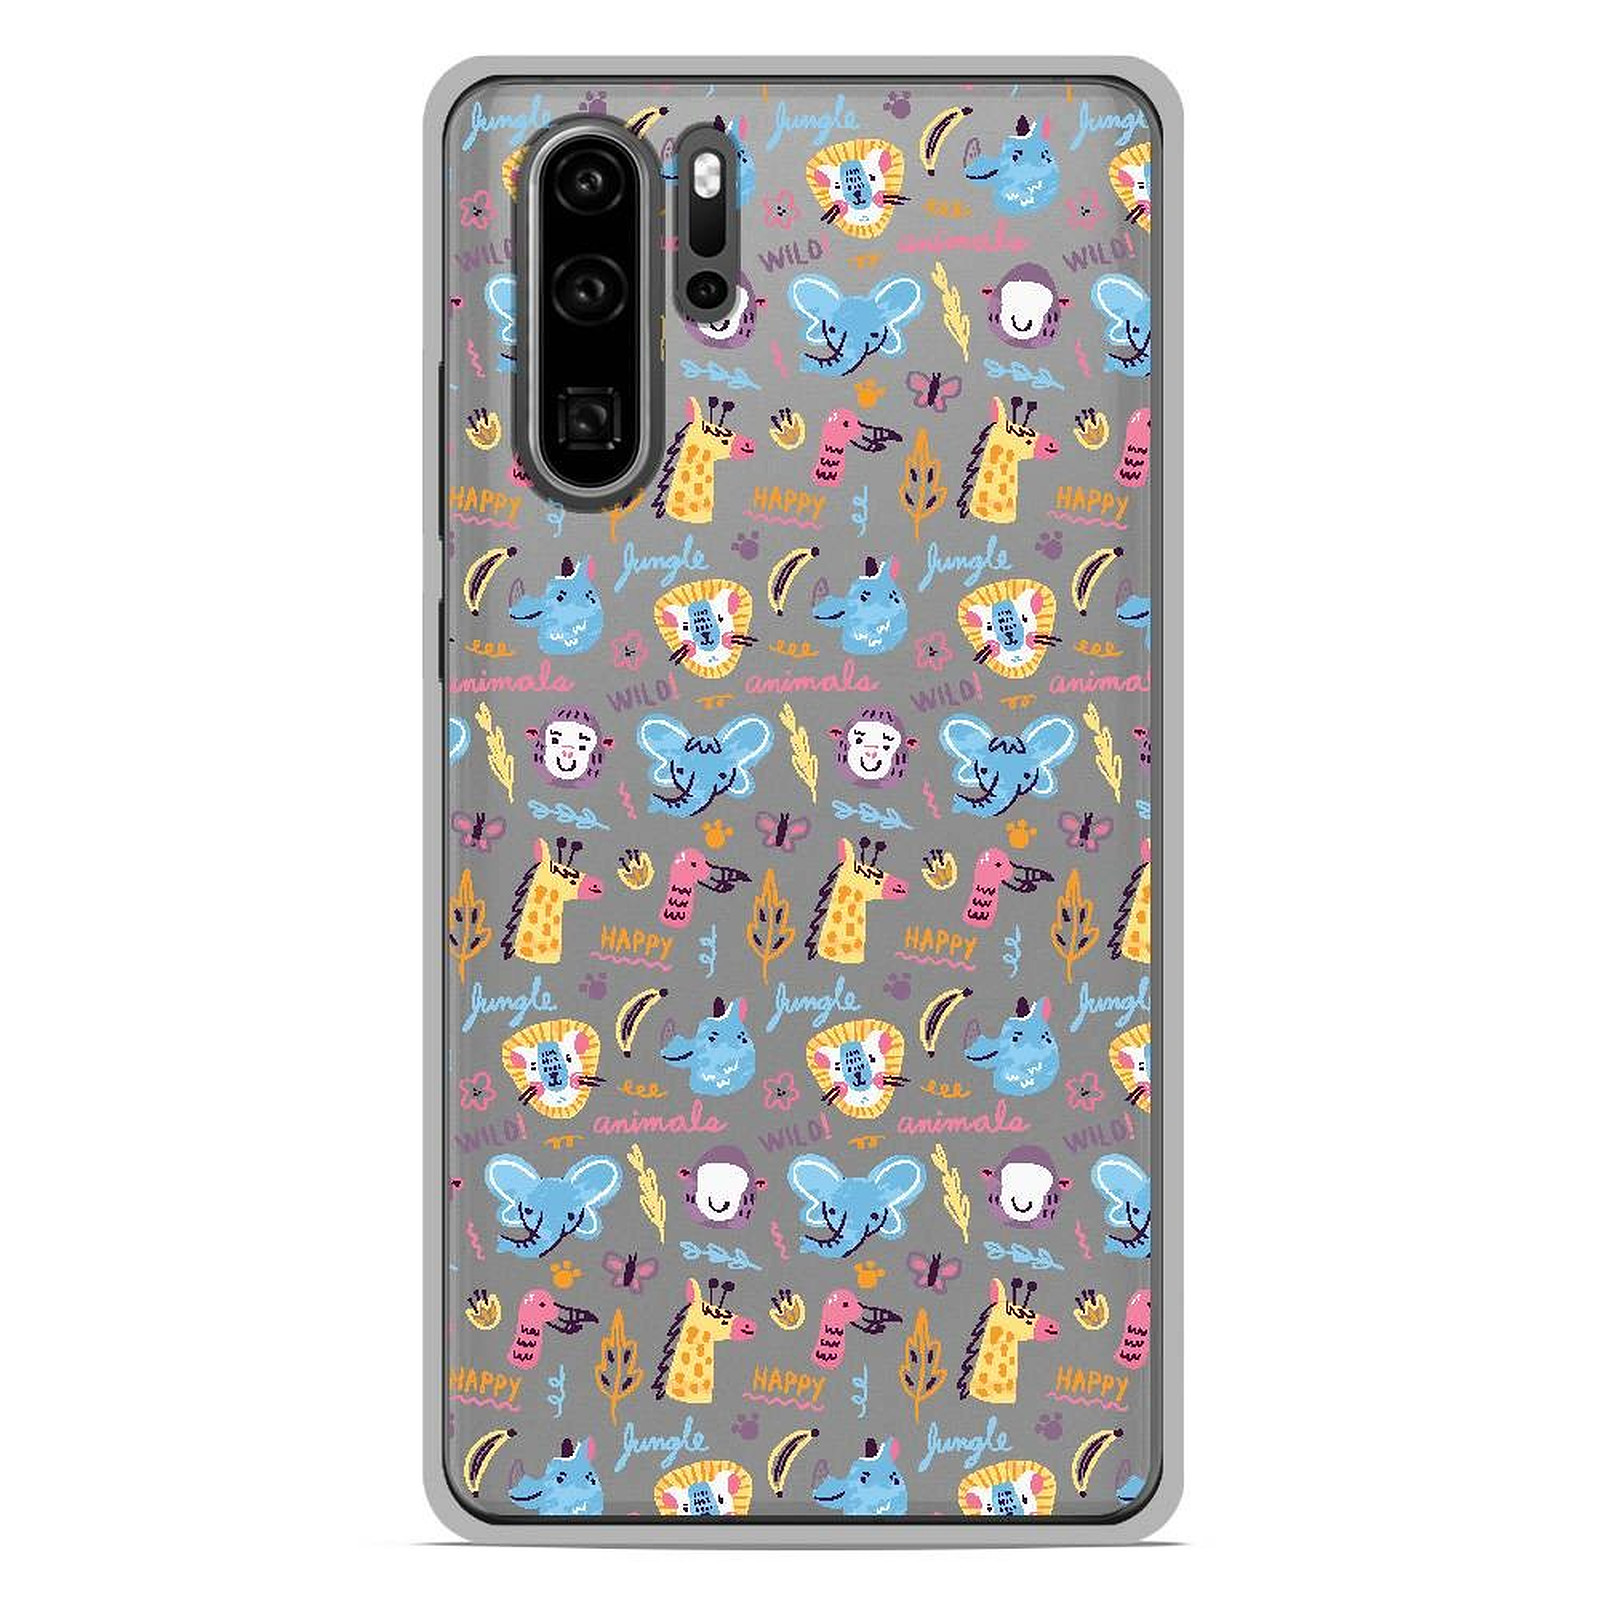 1001 Coques Coque silicone gel Huawei P30 Pro motif Happy animals - Coque telephone 1001Coques